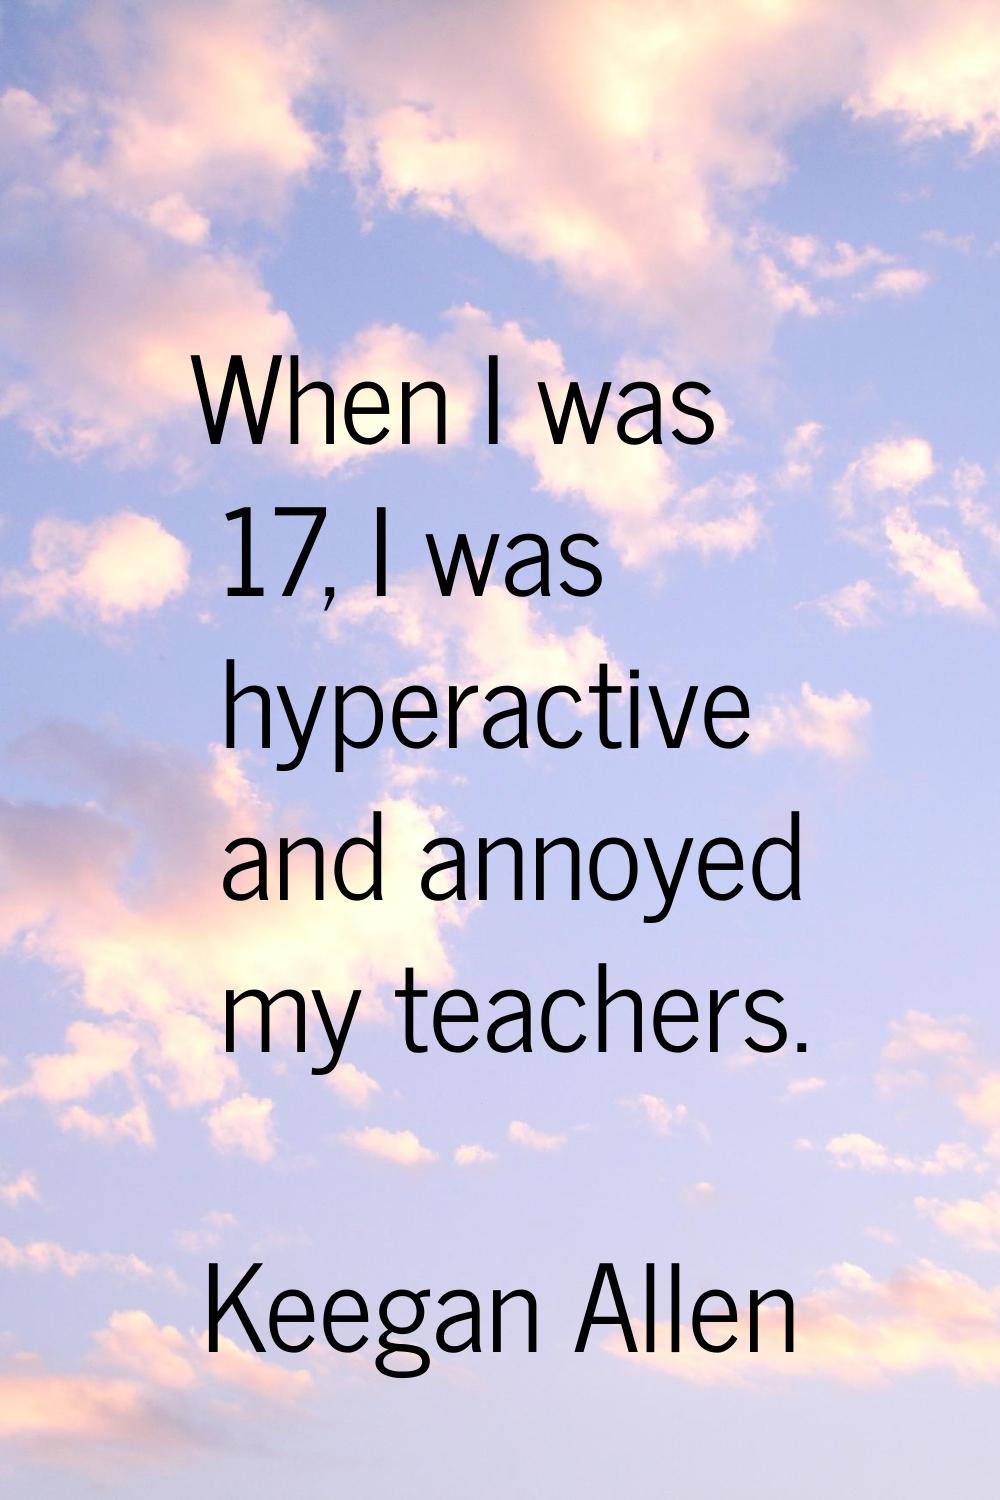 When I was 17, I was hyperactive and annoyed my teachers.